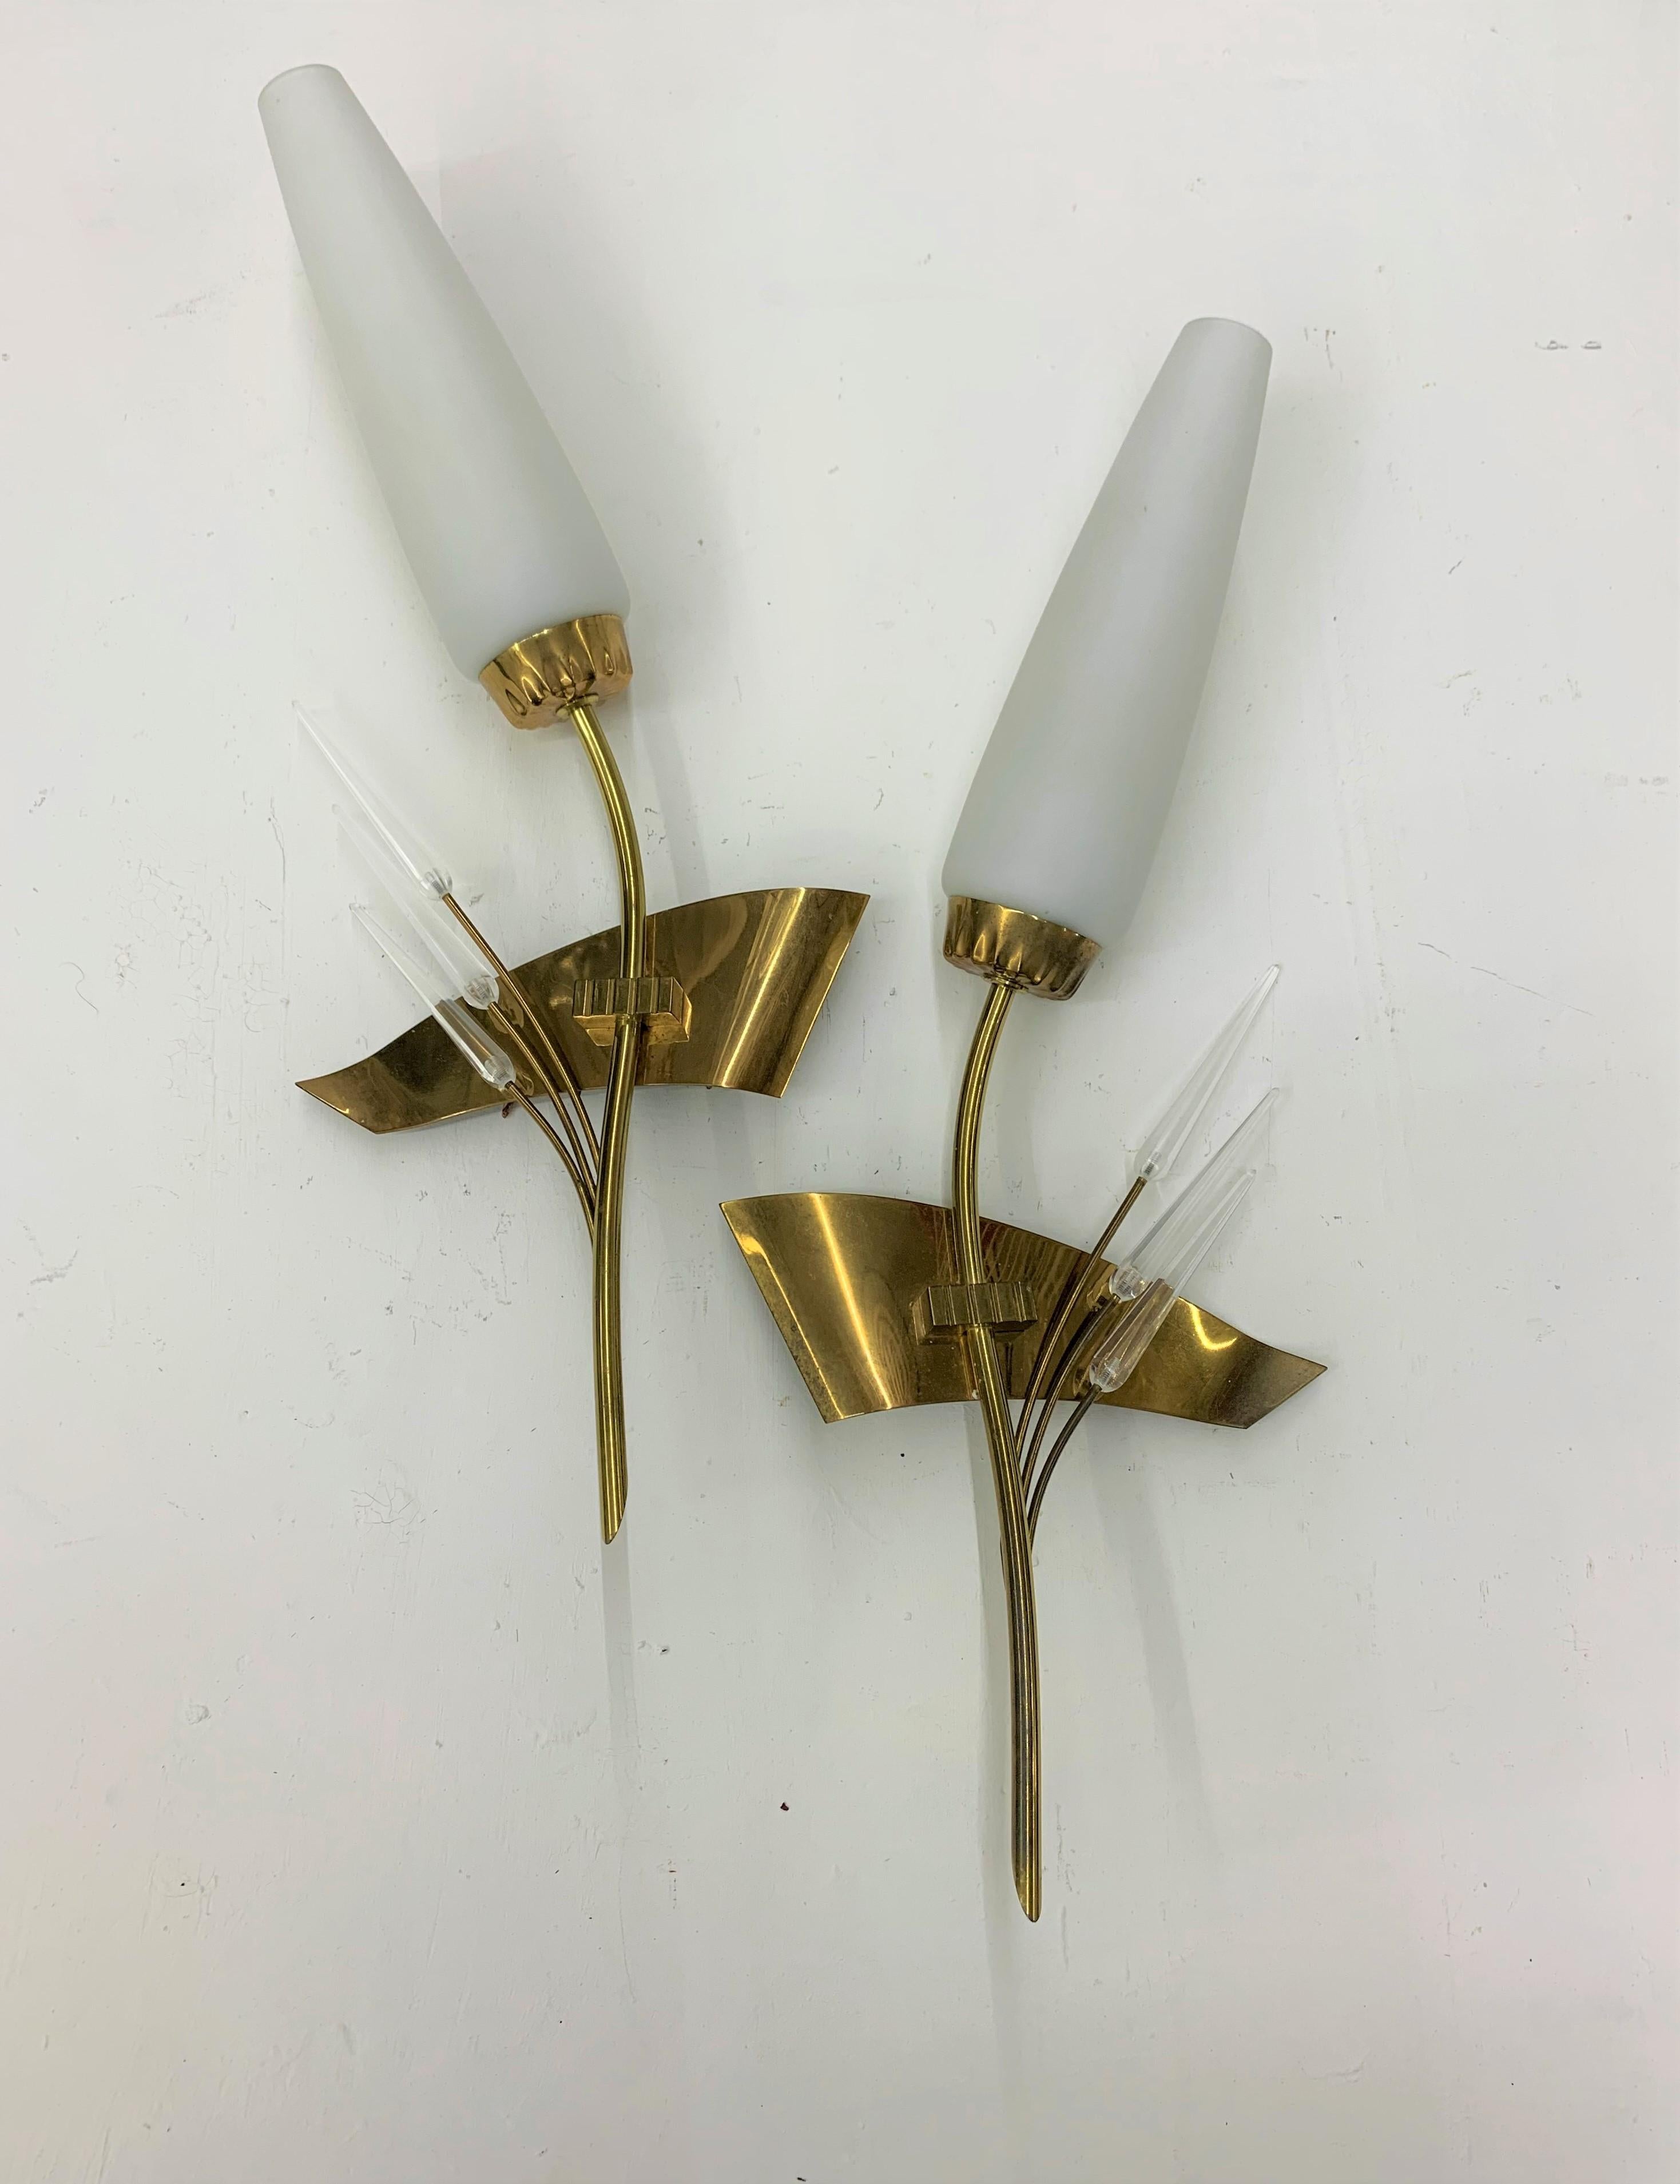 Pair of sconces or wall lights produced by Maison Arlus in brass, Lucite and opaline glass.
Made in France, circa 1950s.
 